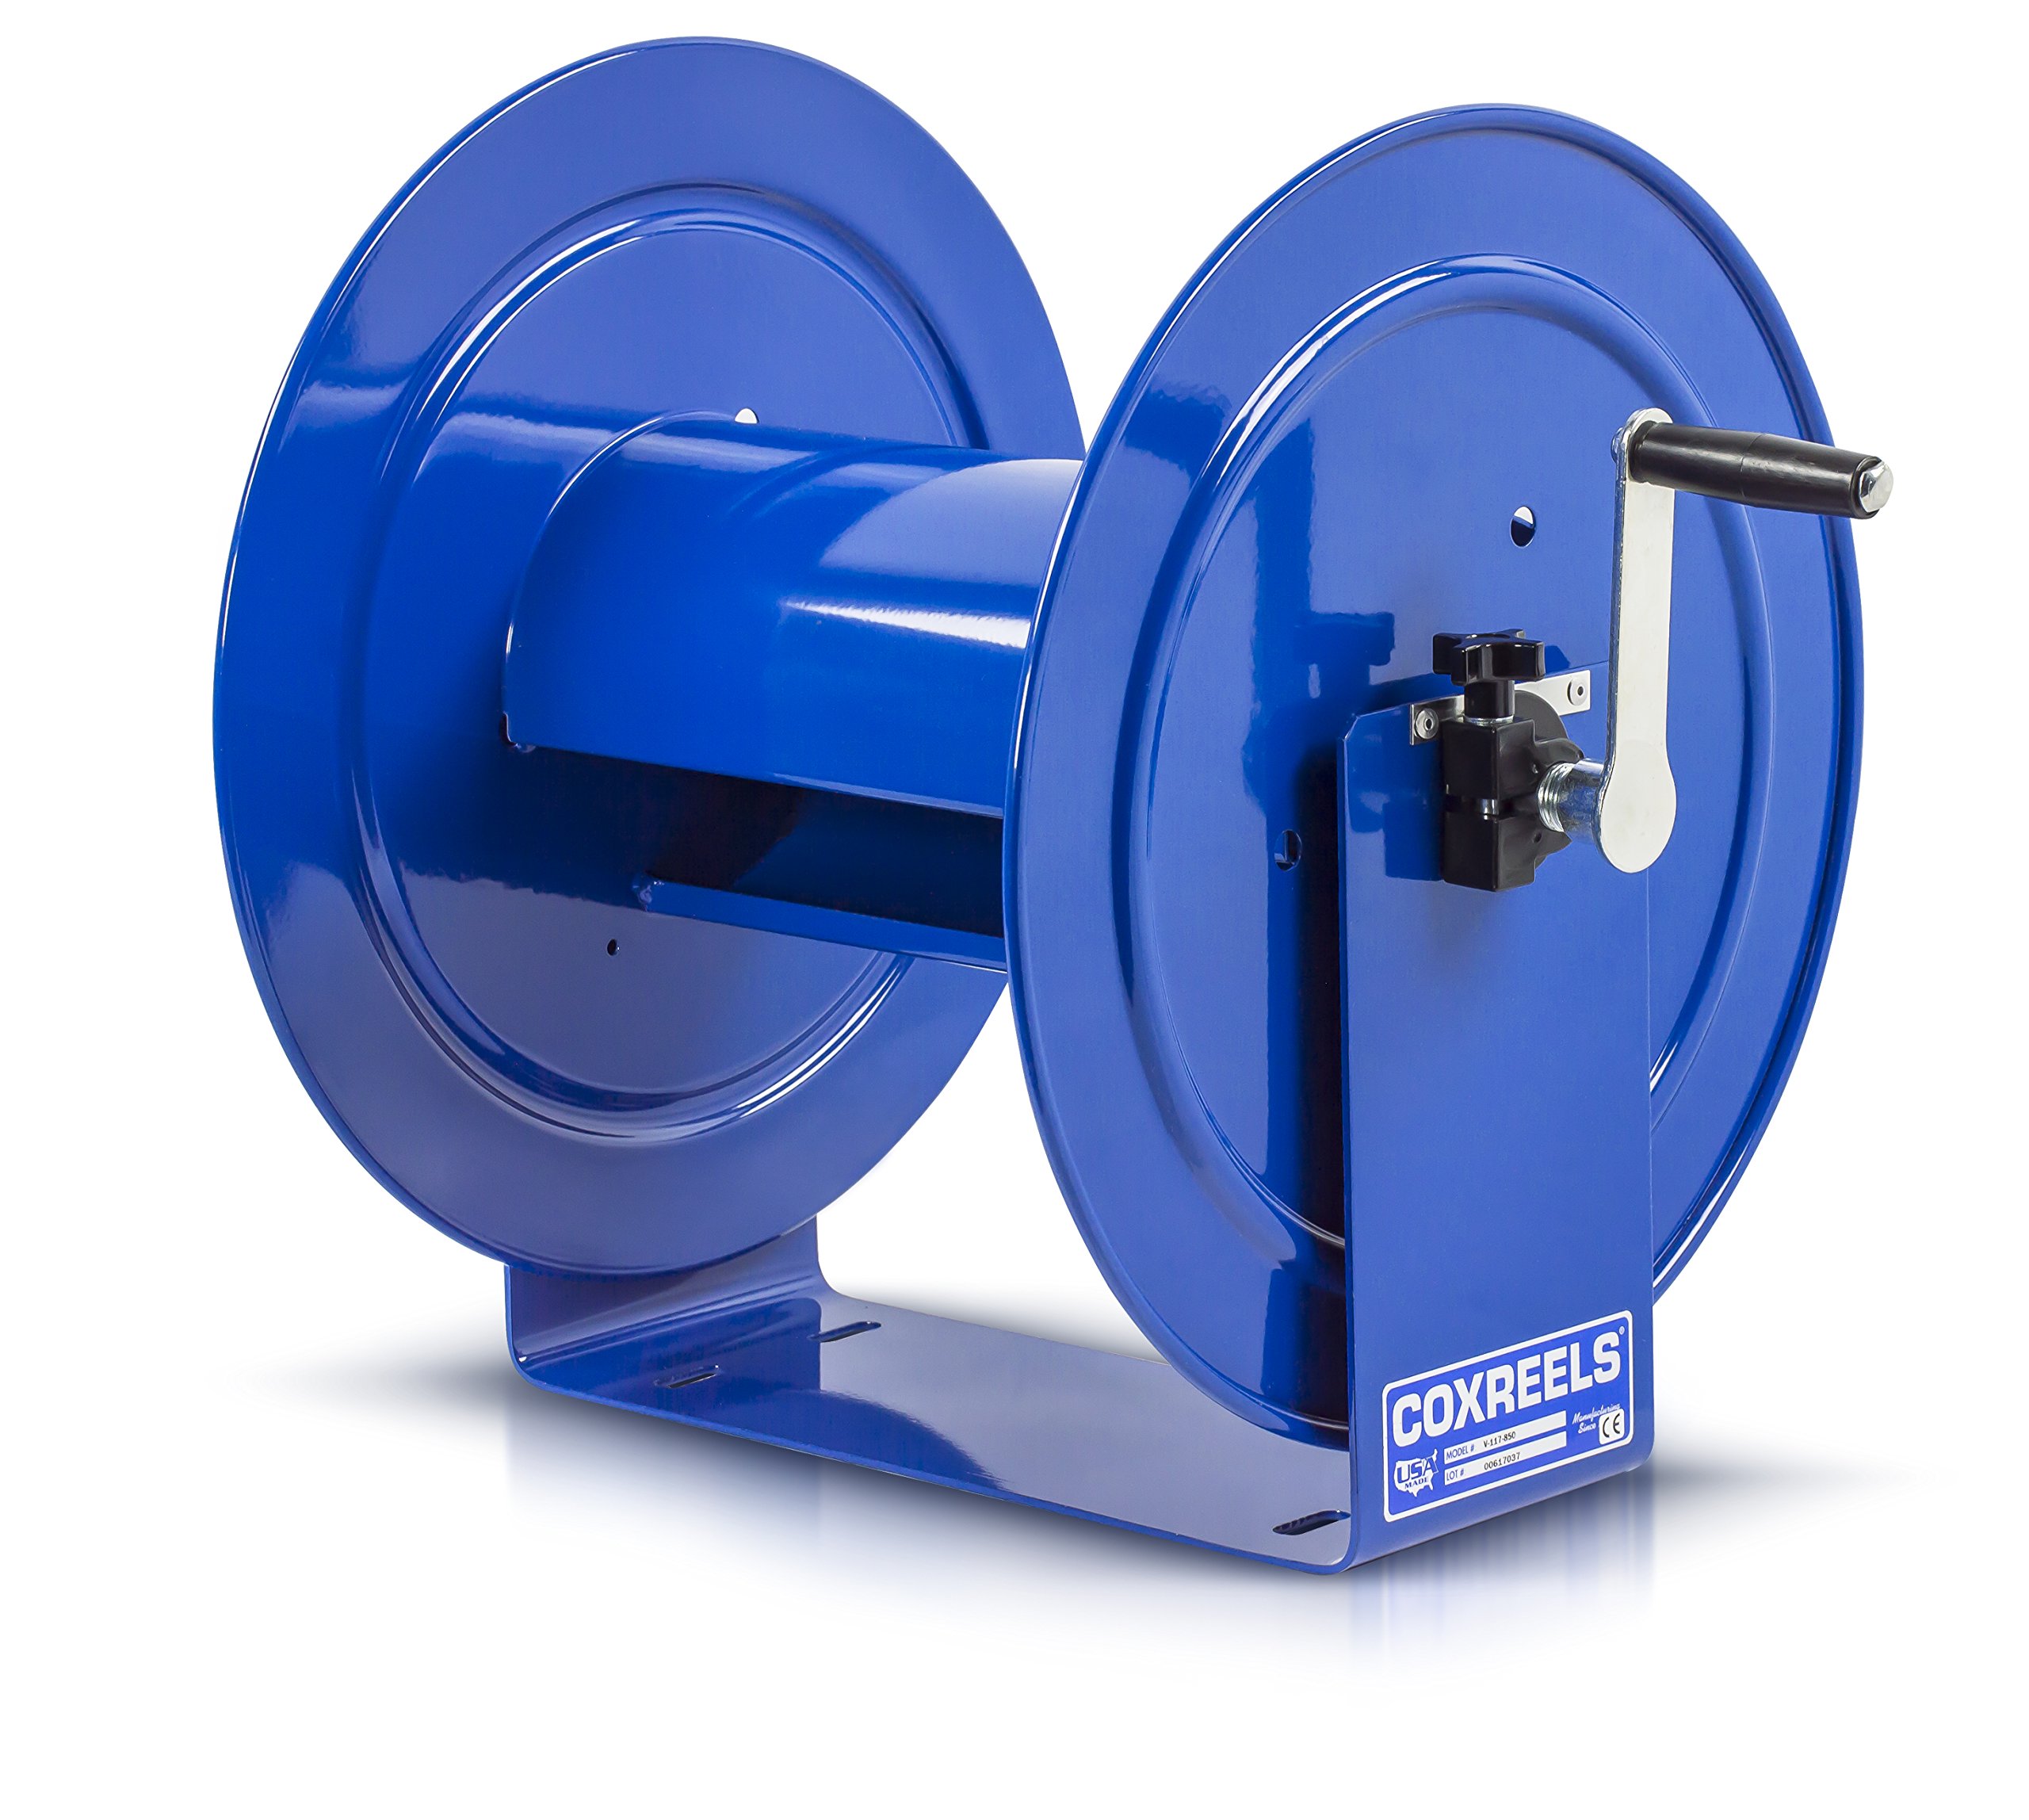 Coxreels V-117-850 Hand Crank Steel Hose Reel, V-100 Series, 1 ½” x 50’ – Easy to Use Compact Design – Heavy Duty ...